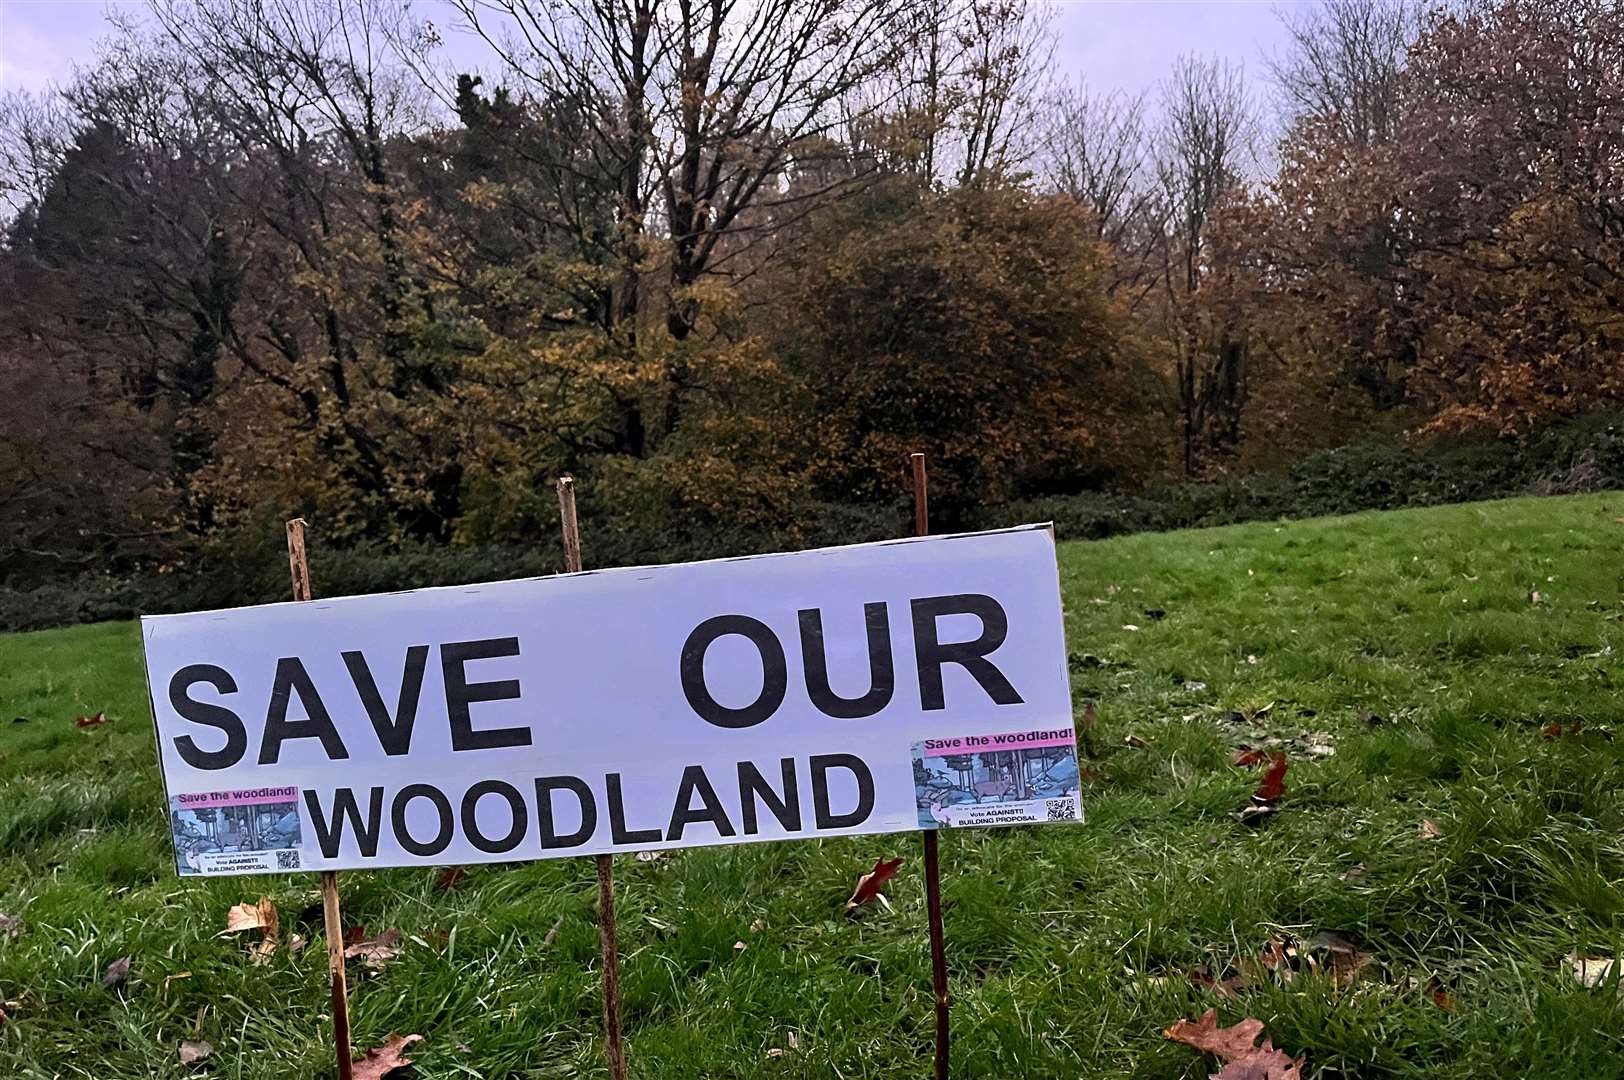 The plans have now been refused following fears over the loss of green space